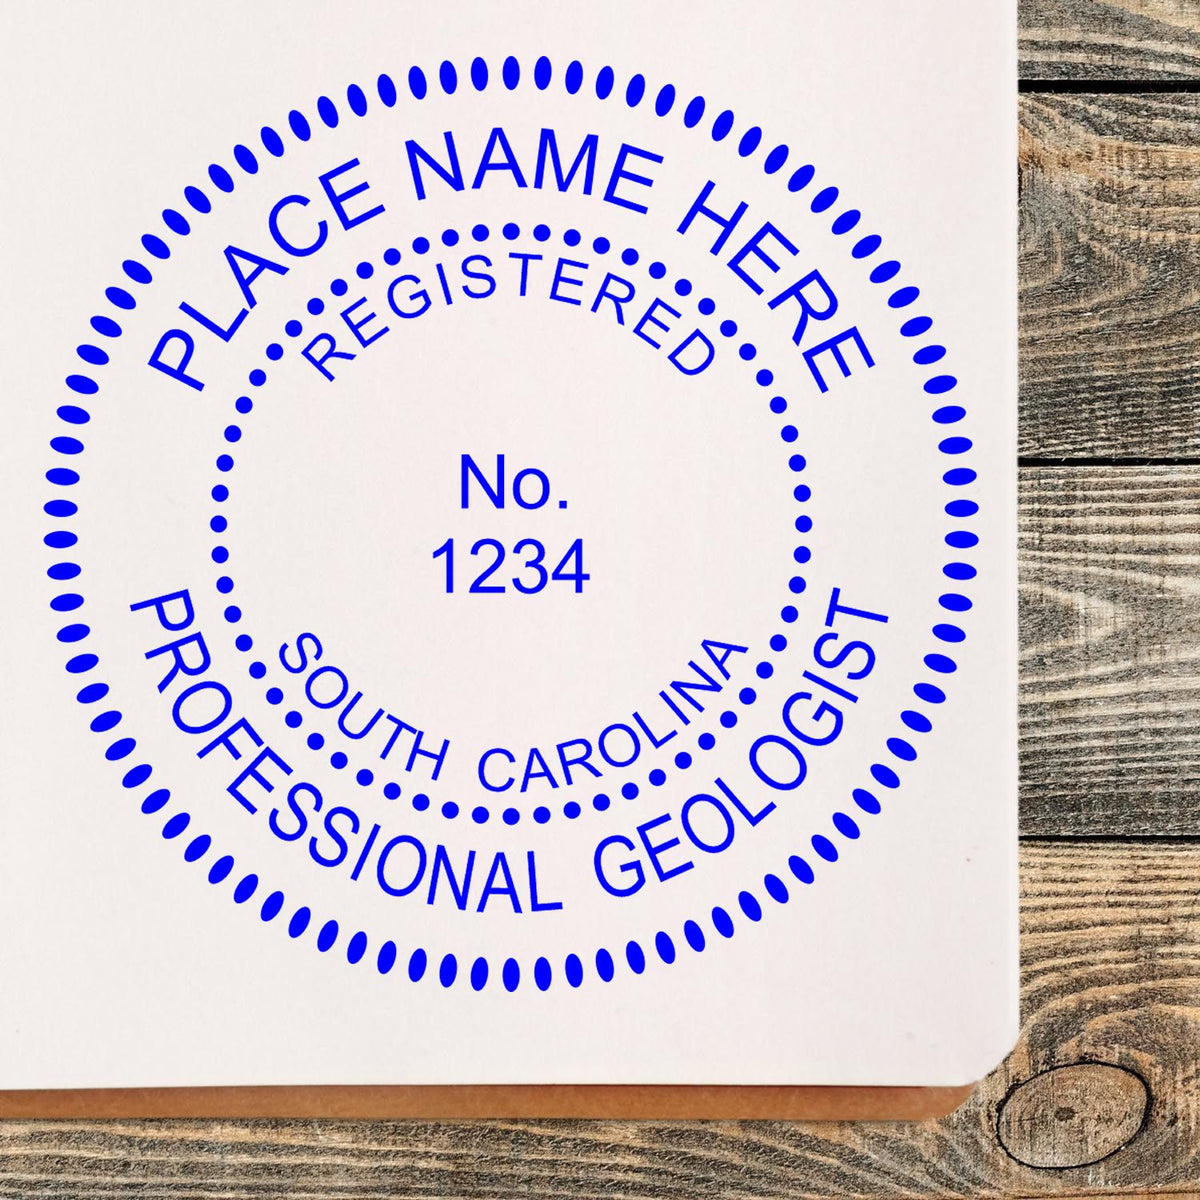 Another Example of a stamped impression of the Premium MaxLight Pre-Inked South Carolina Geology Stamp on a office form